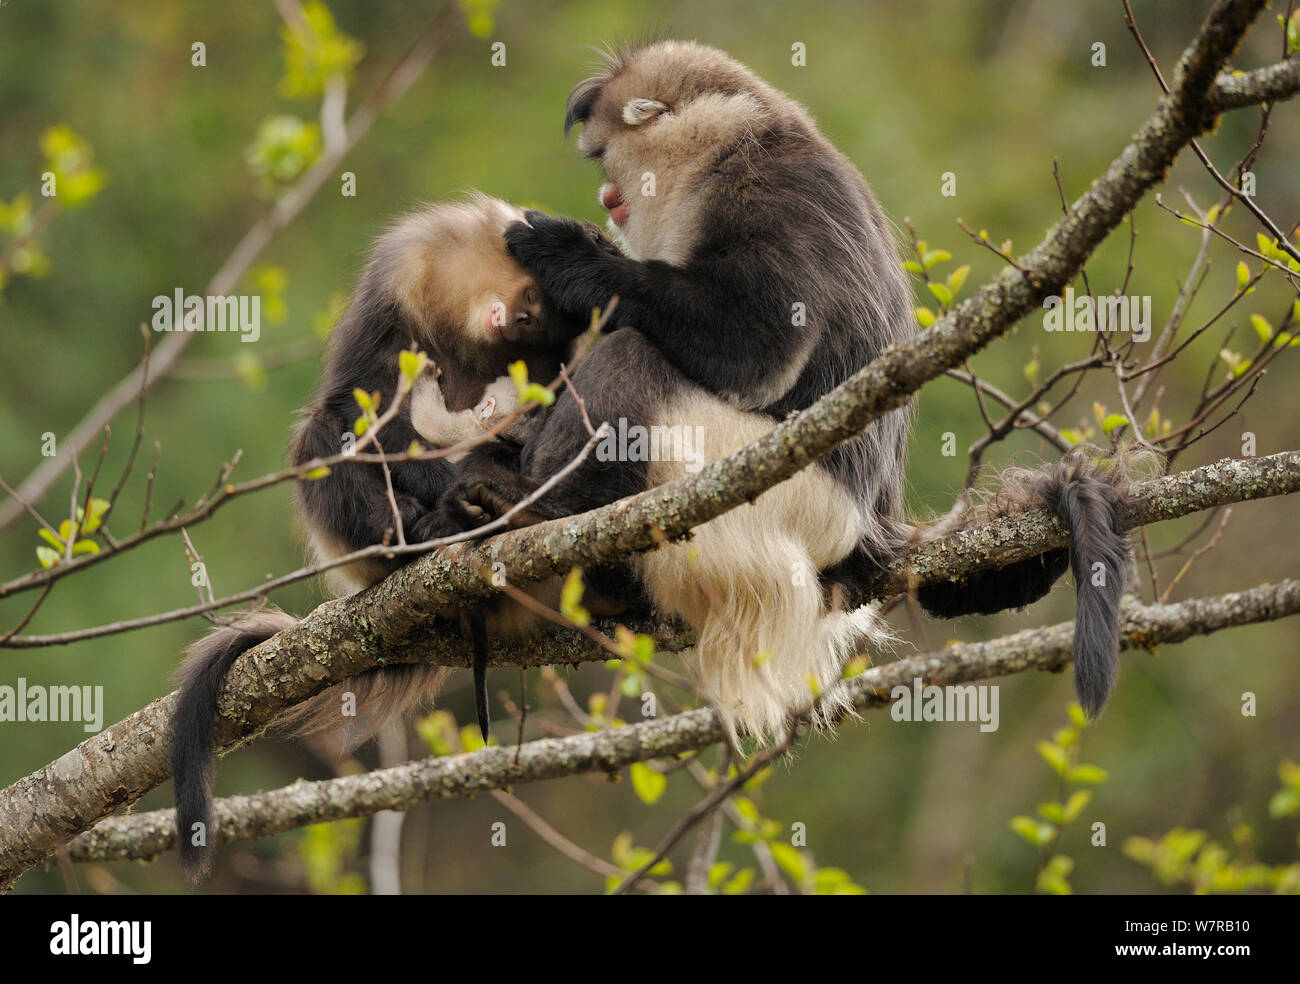 Yunnan Snub-nosed monkey (Rhinopithecus bieti) grooming a mother with a baby, Ta Chen NP, Yunnan province, China Stock Photo